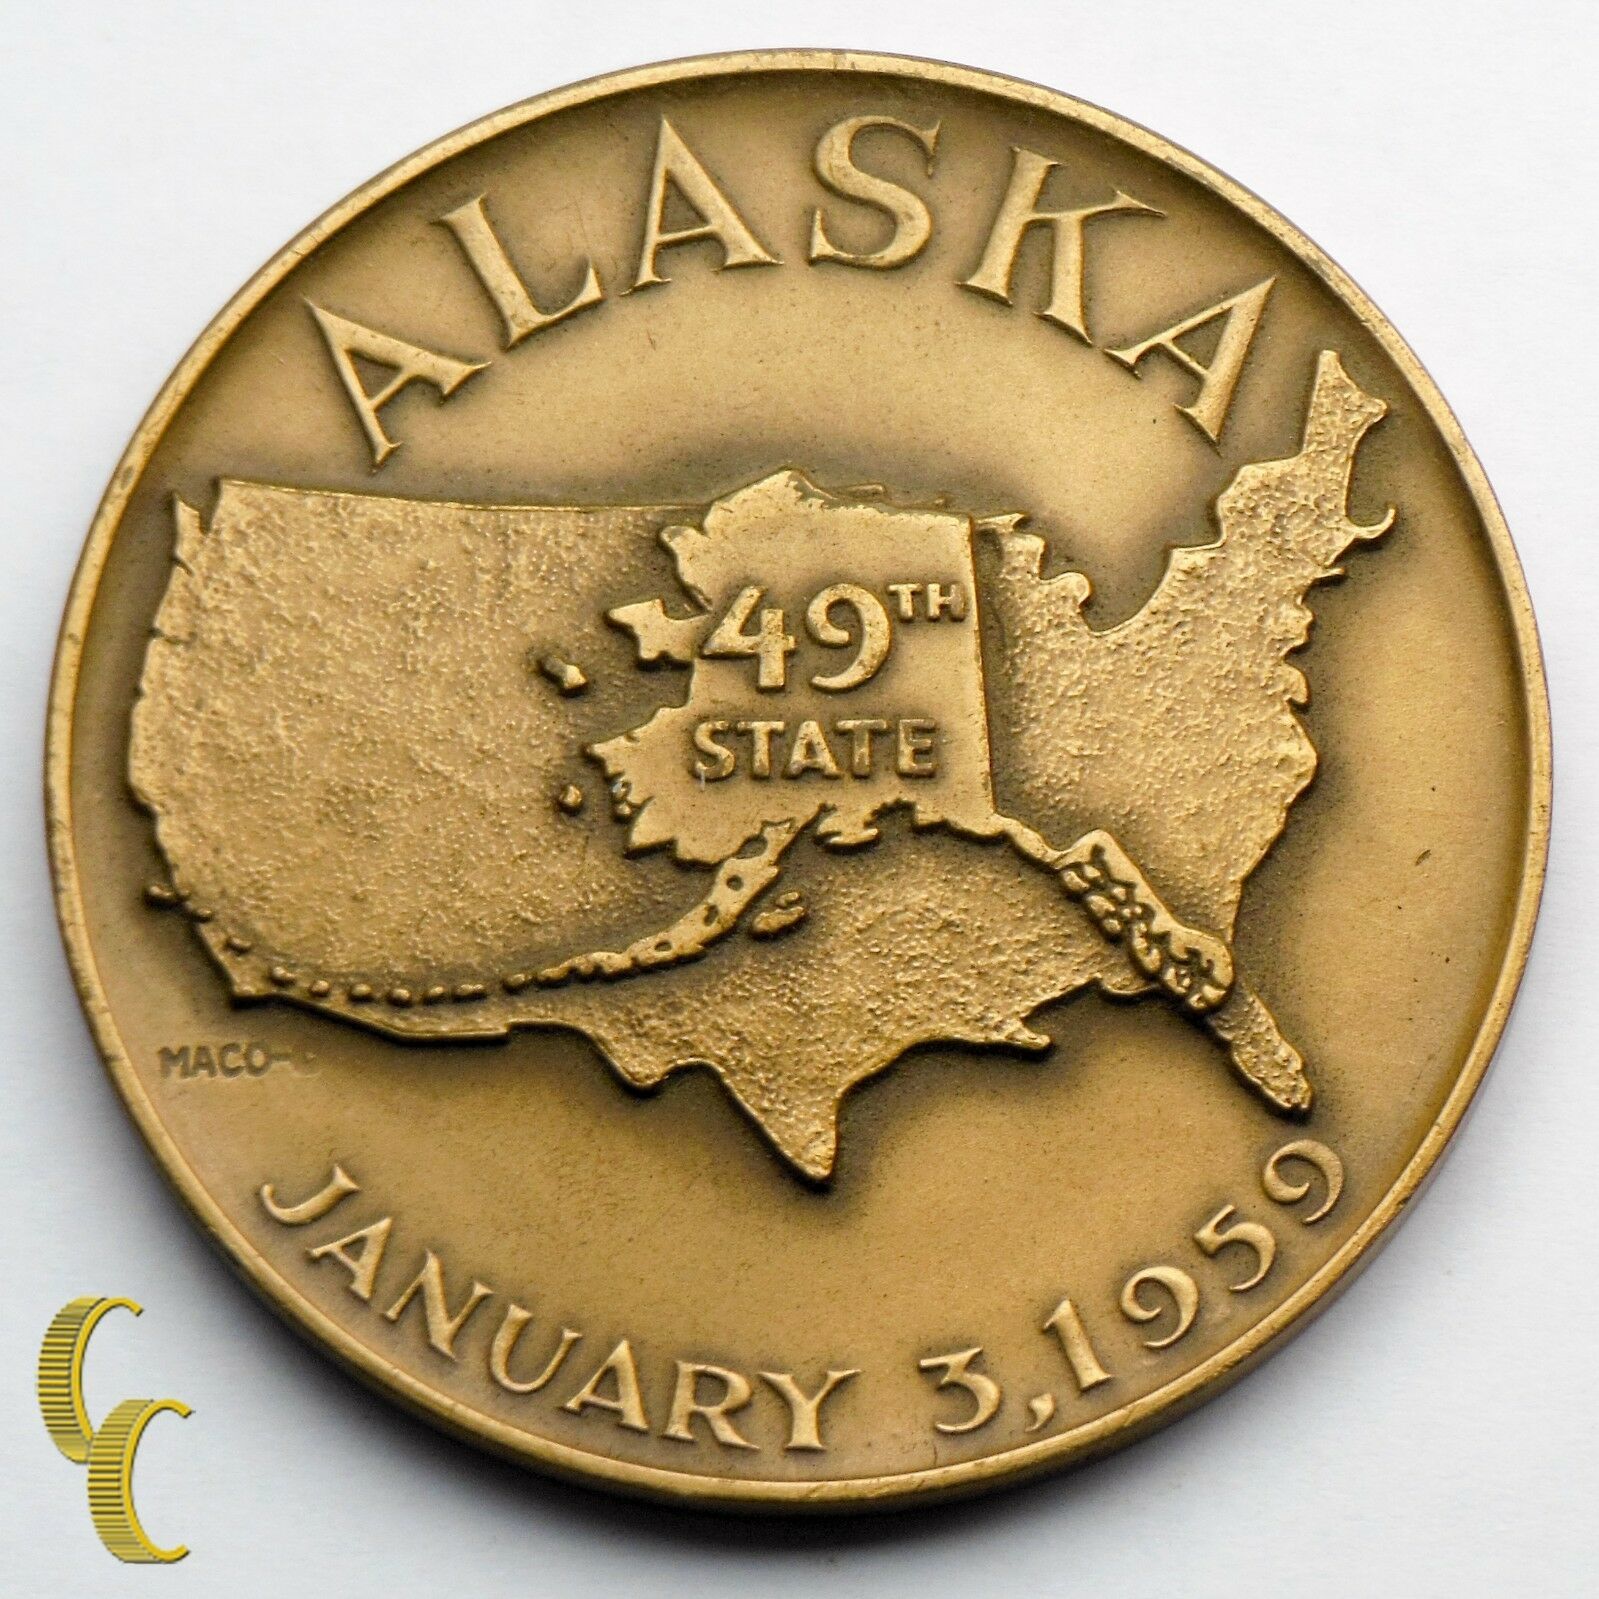 Primary image for 1959 Alaska 49th State Medallic Art Company Medal